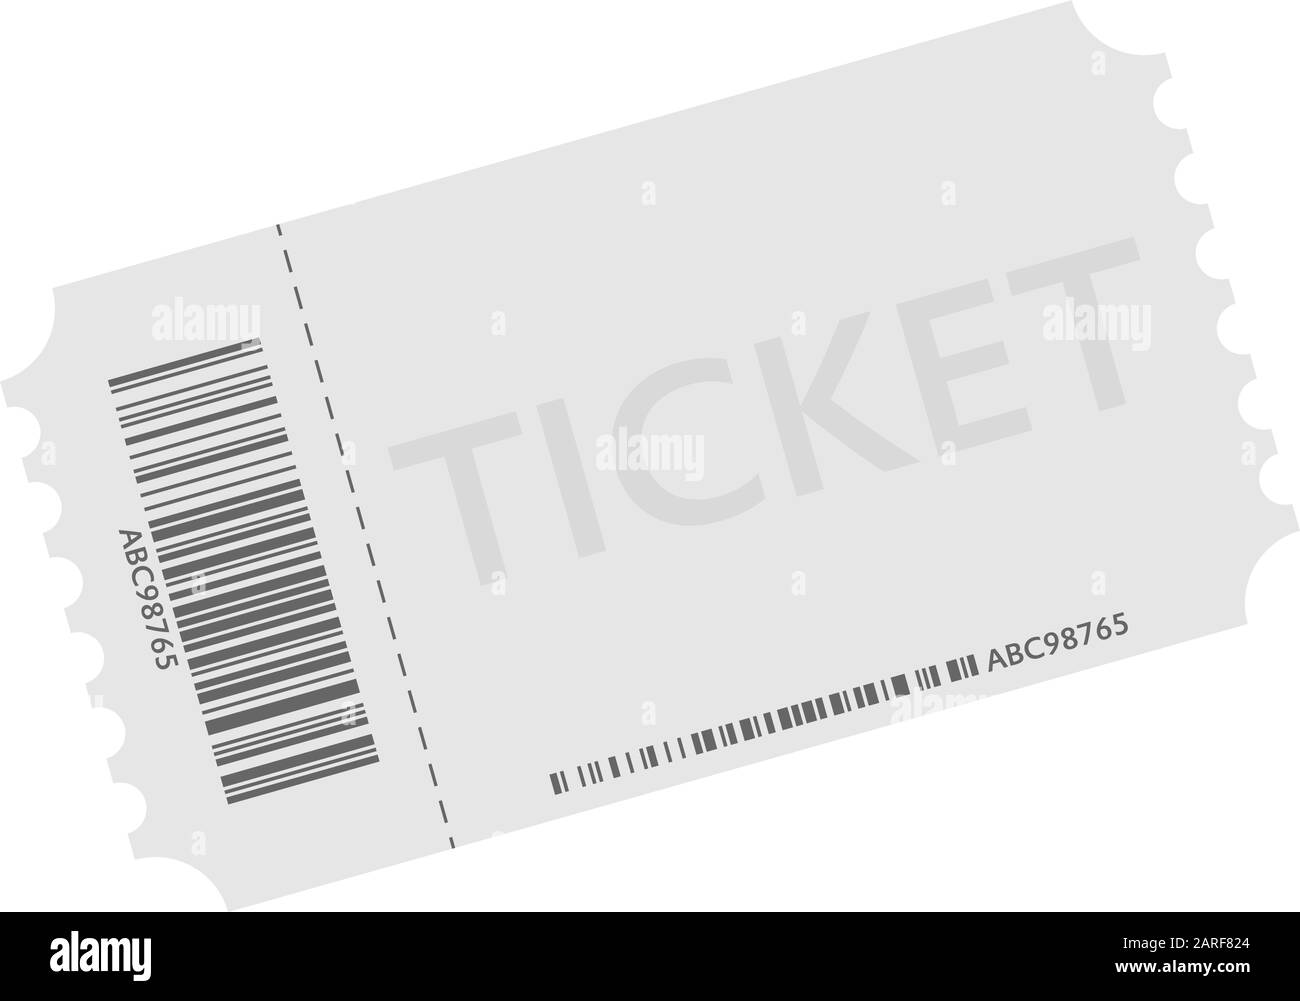 admission ticket with detatchable stub with barcode symbol vector illustration Stock Vector